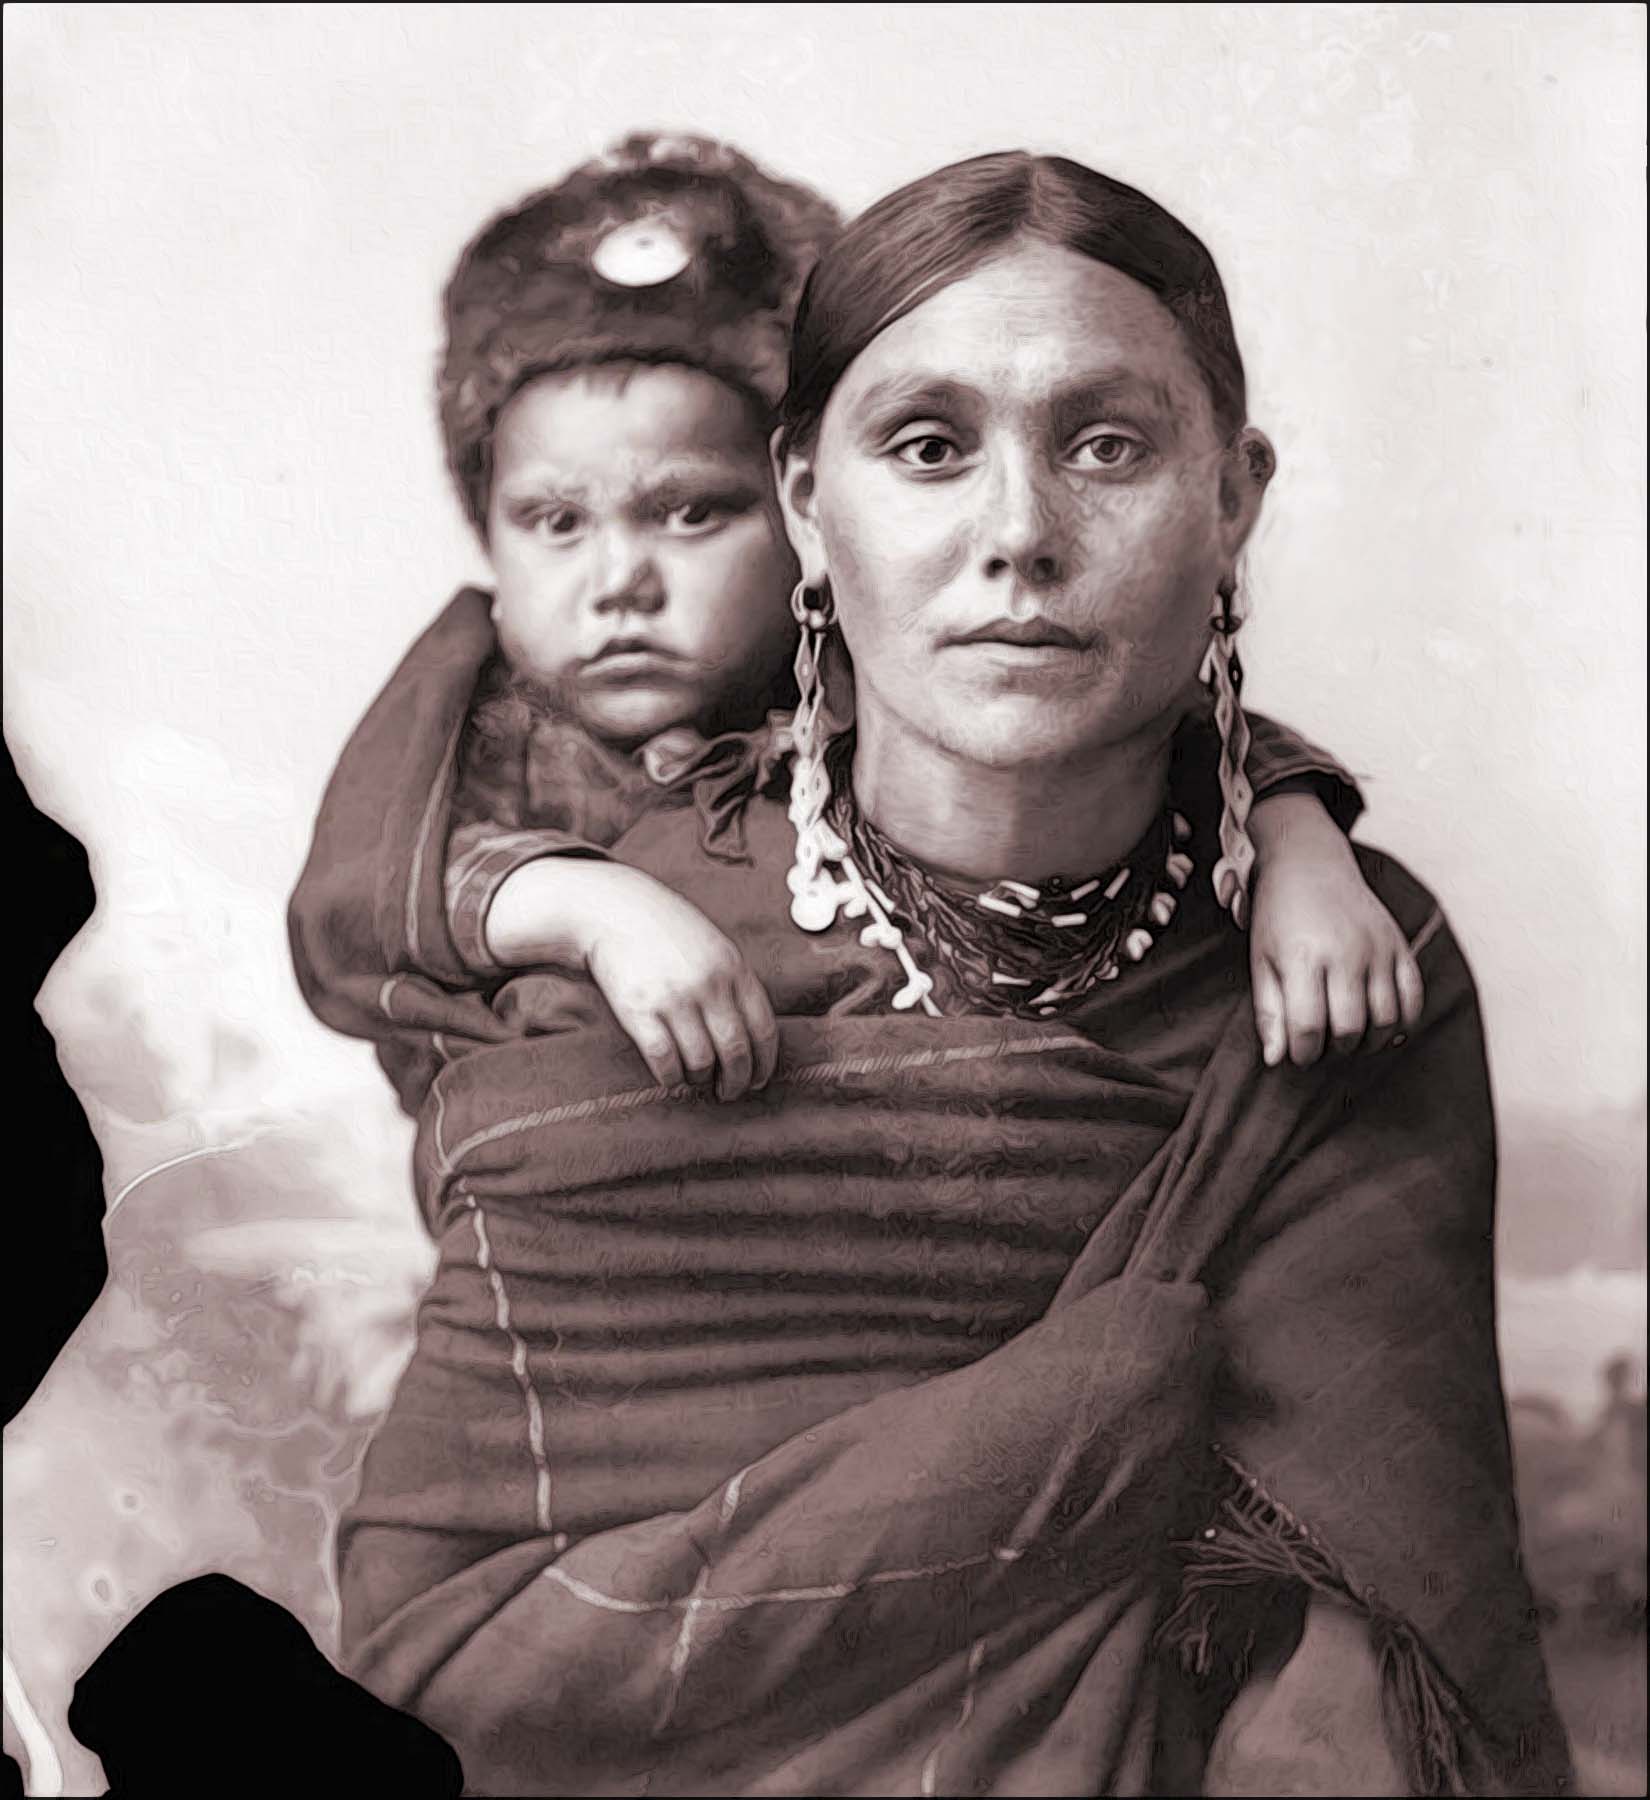 Ho-Chunk mother carrying her son on her back, Black River Falls, Wisconsin, 1897 (photographed by Charles Van Schaick)